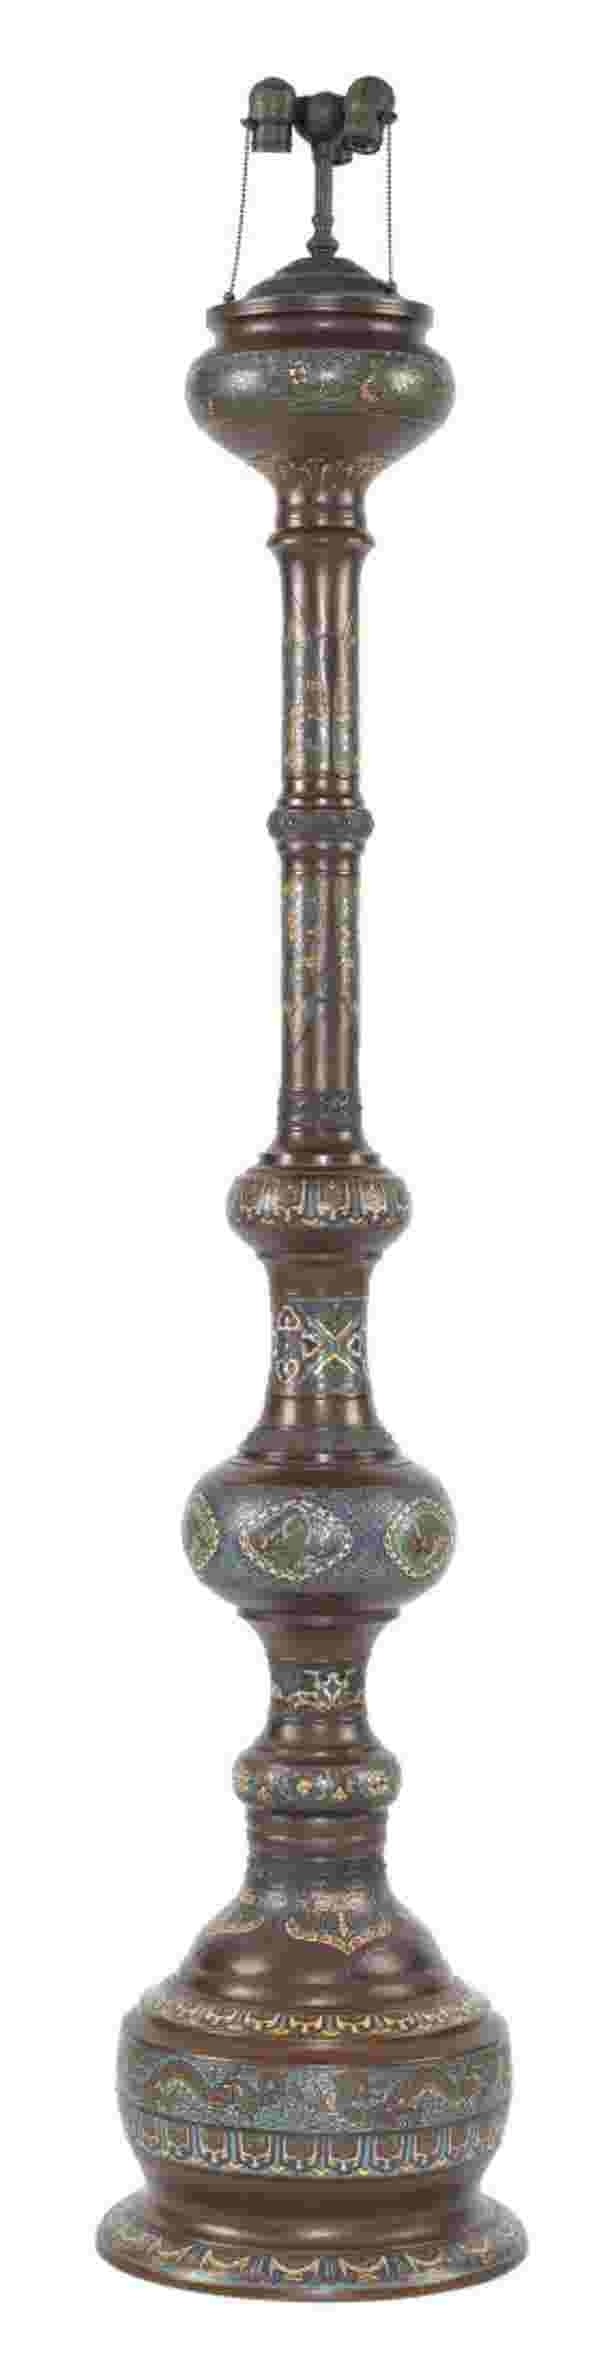 Chinese cloisonne floor lamp ca 1900 67 h